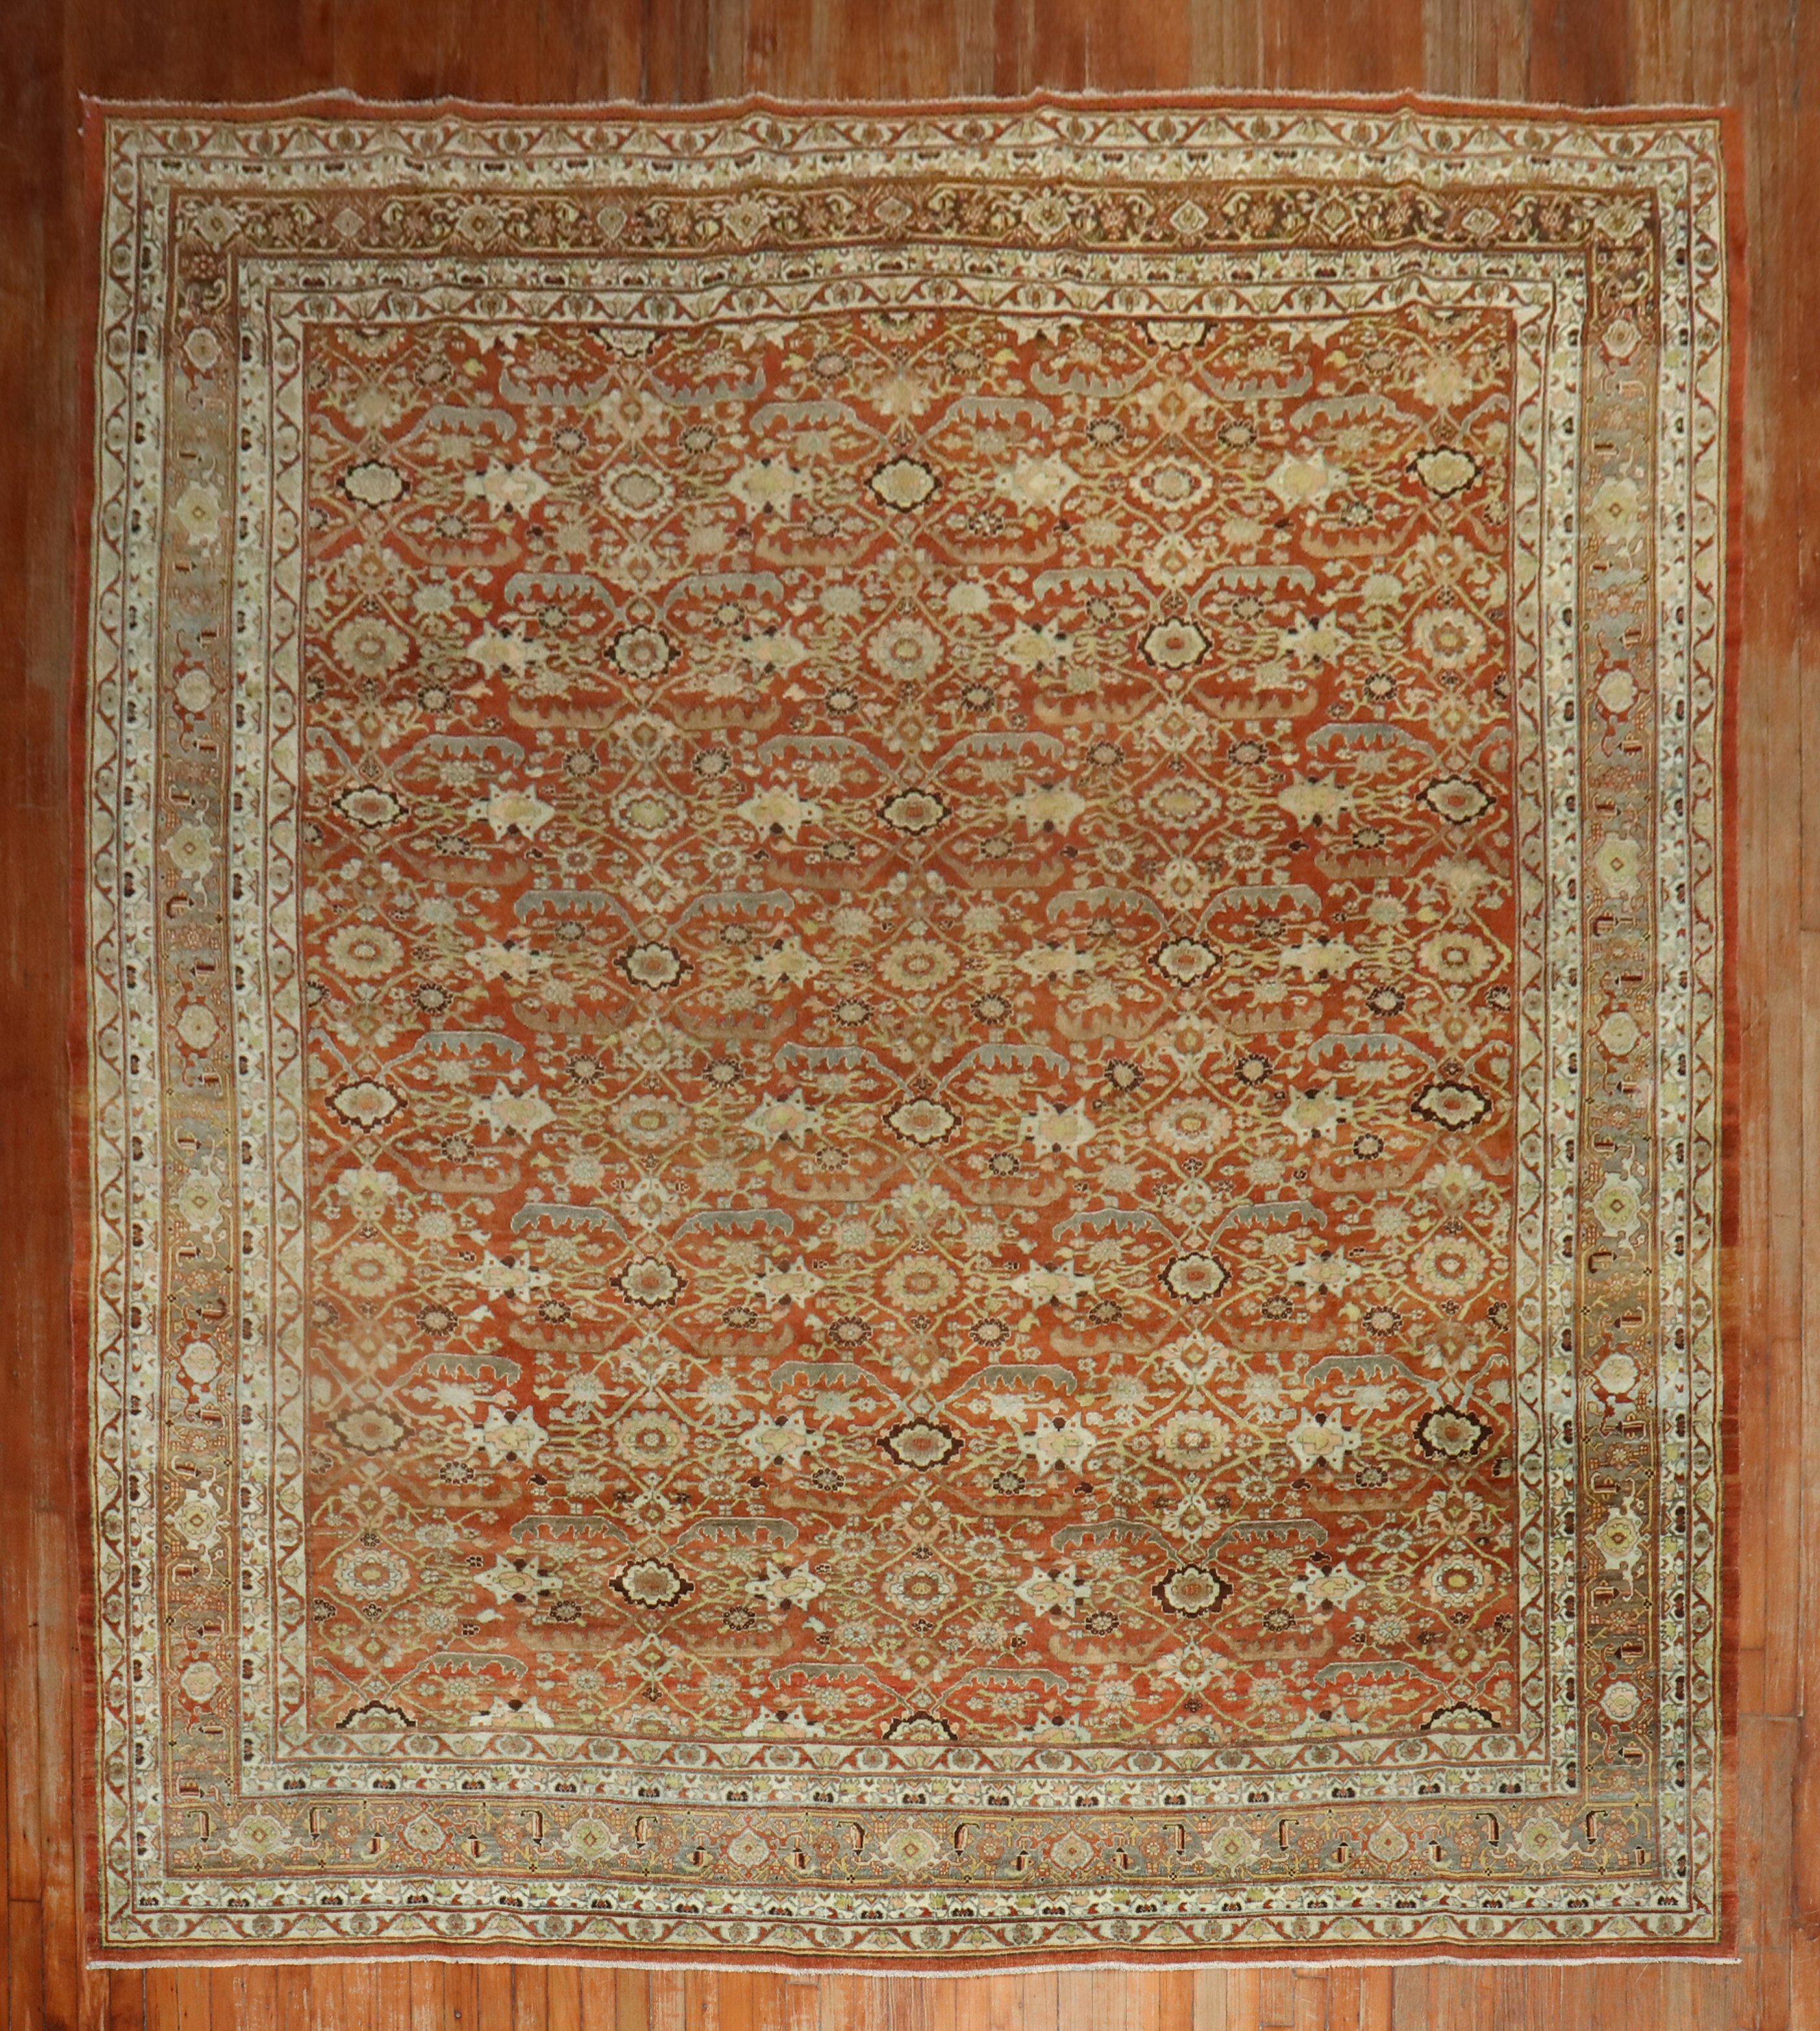 Early 20th century Persian Bidjar room-size rug in red and brown tones

Measures: 9'4'' x 12'2''

 